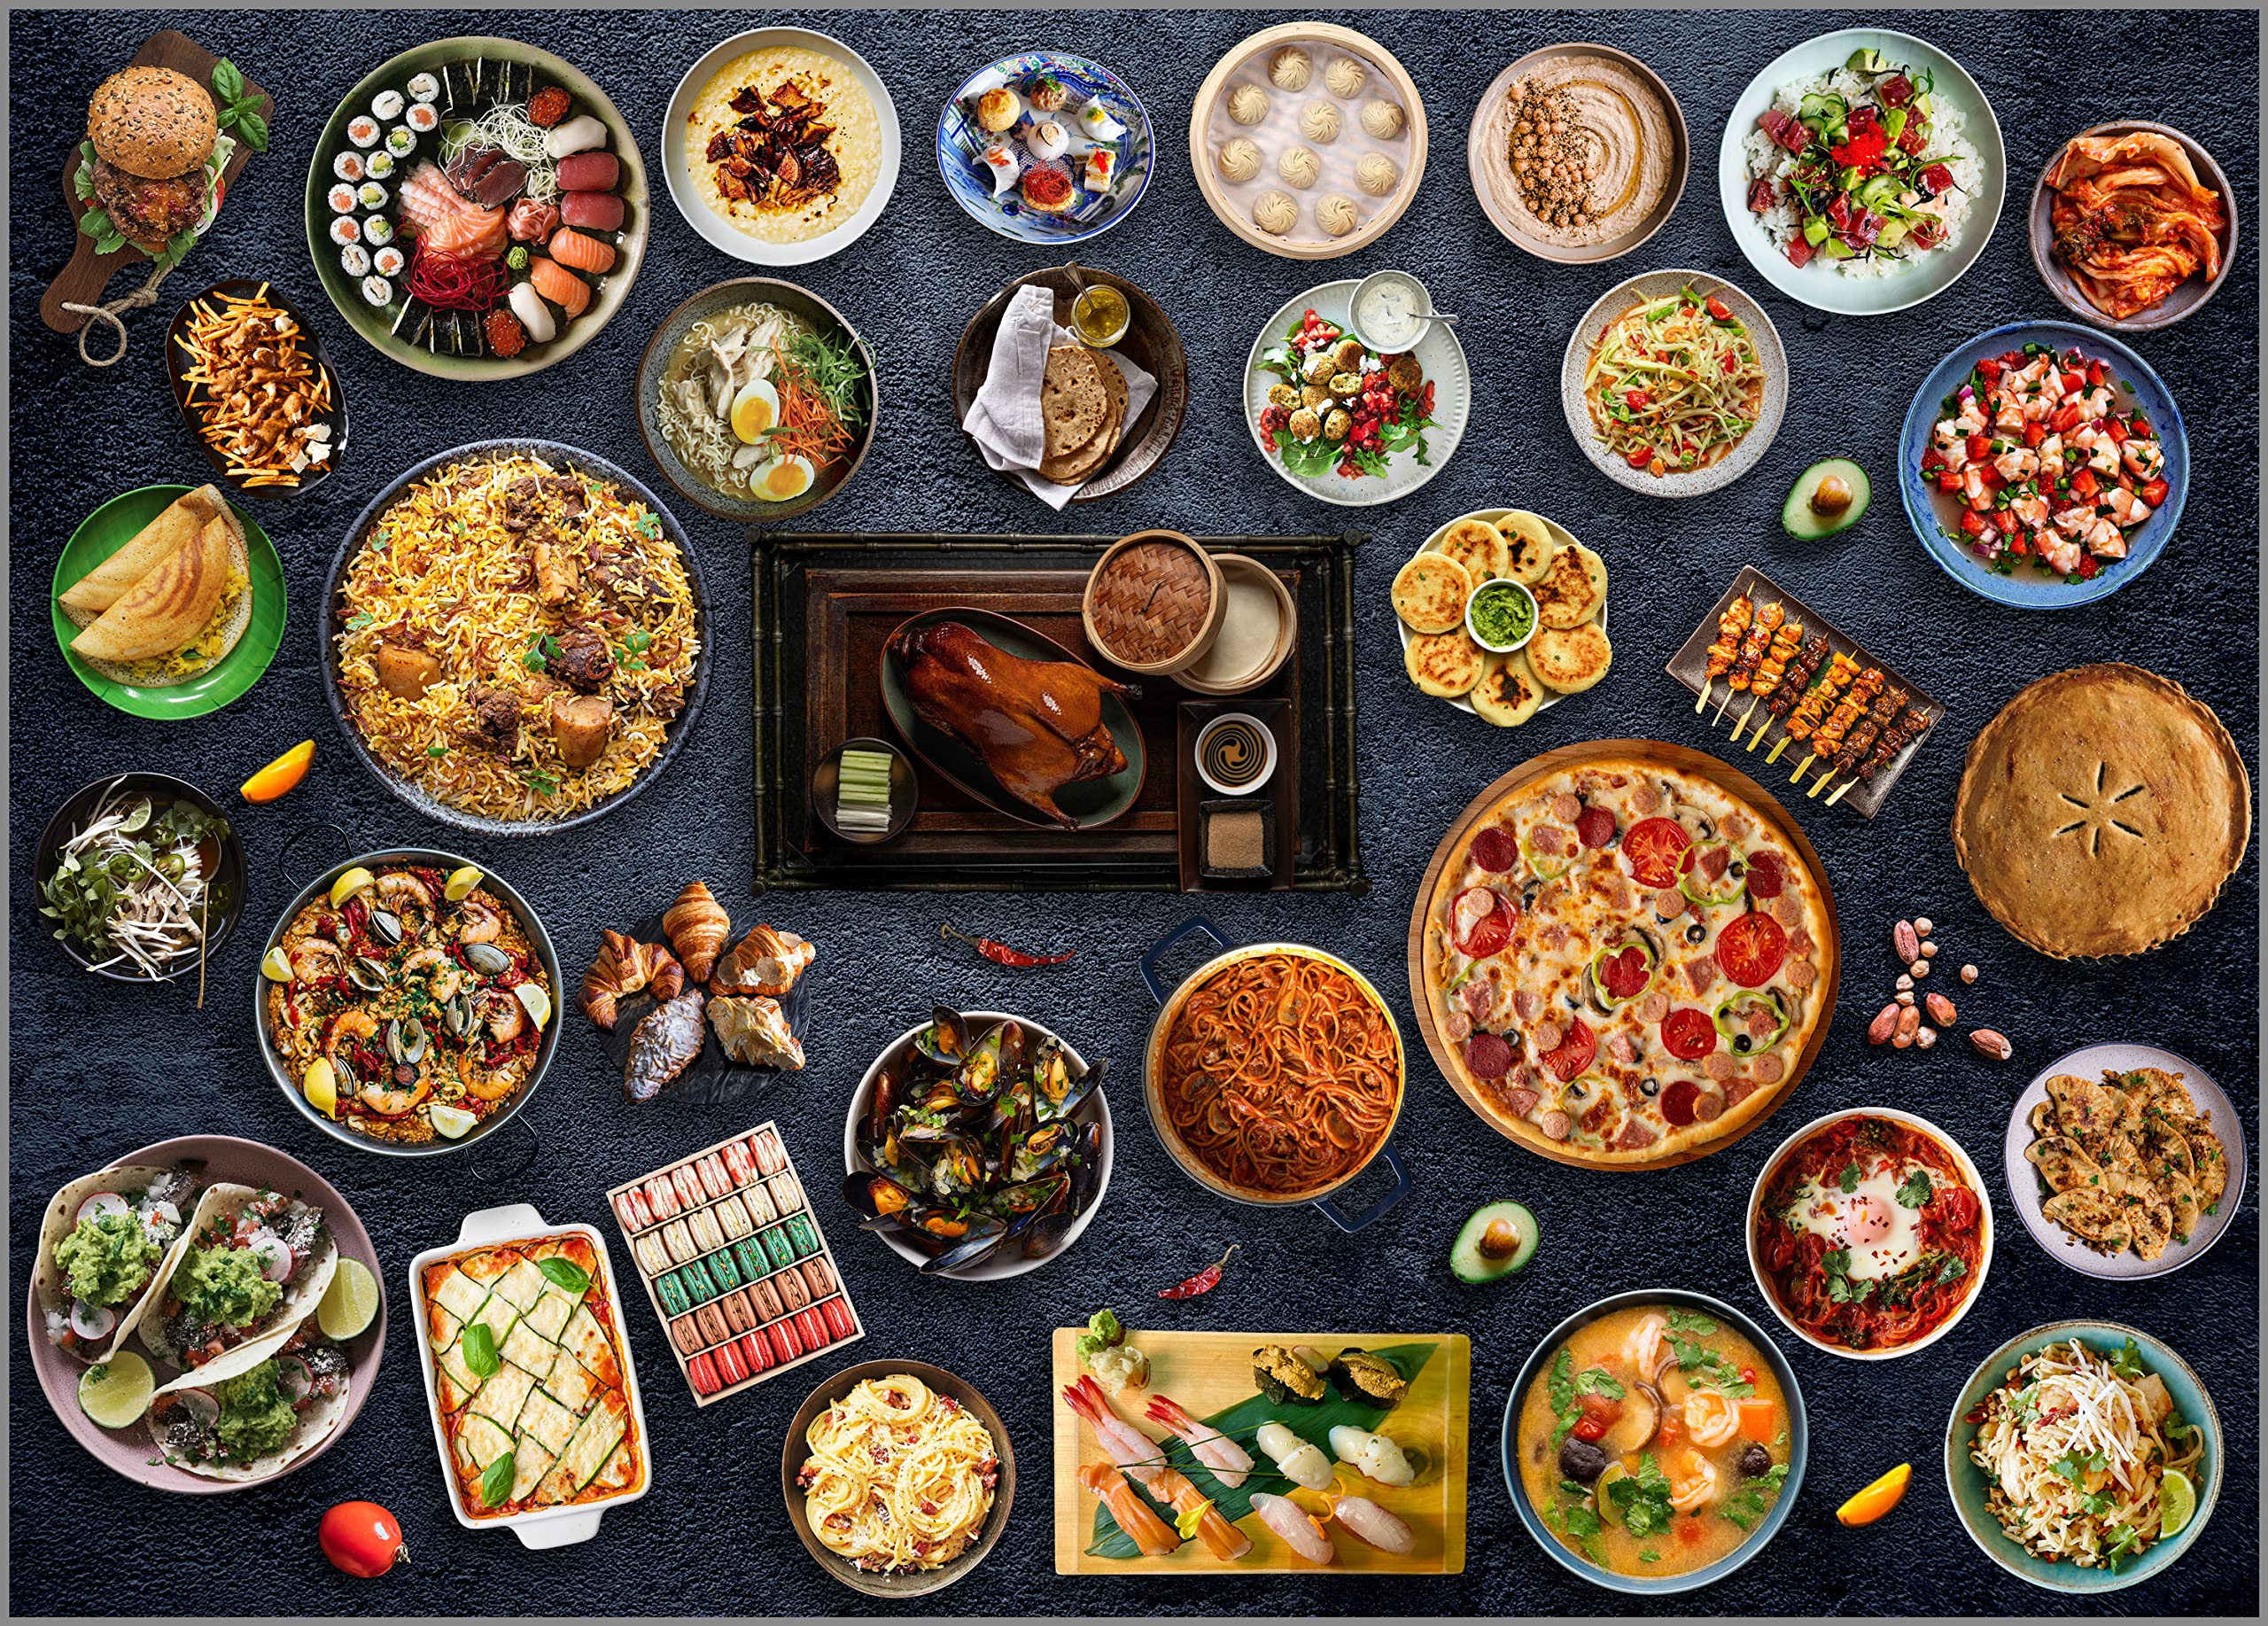 Food Themed Jigsaw Puzzles 1000 Pieces